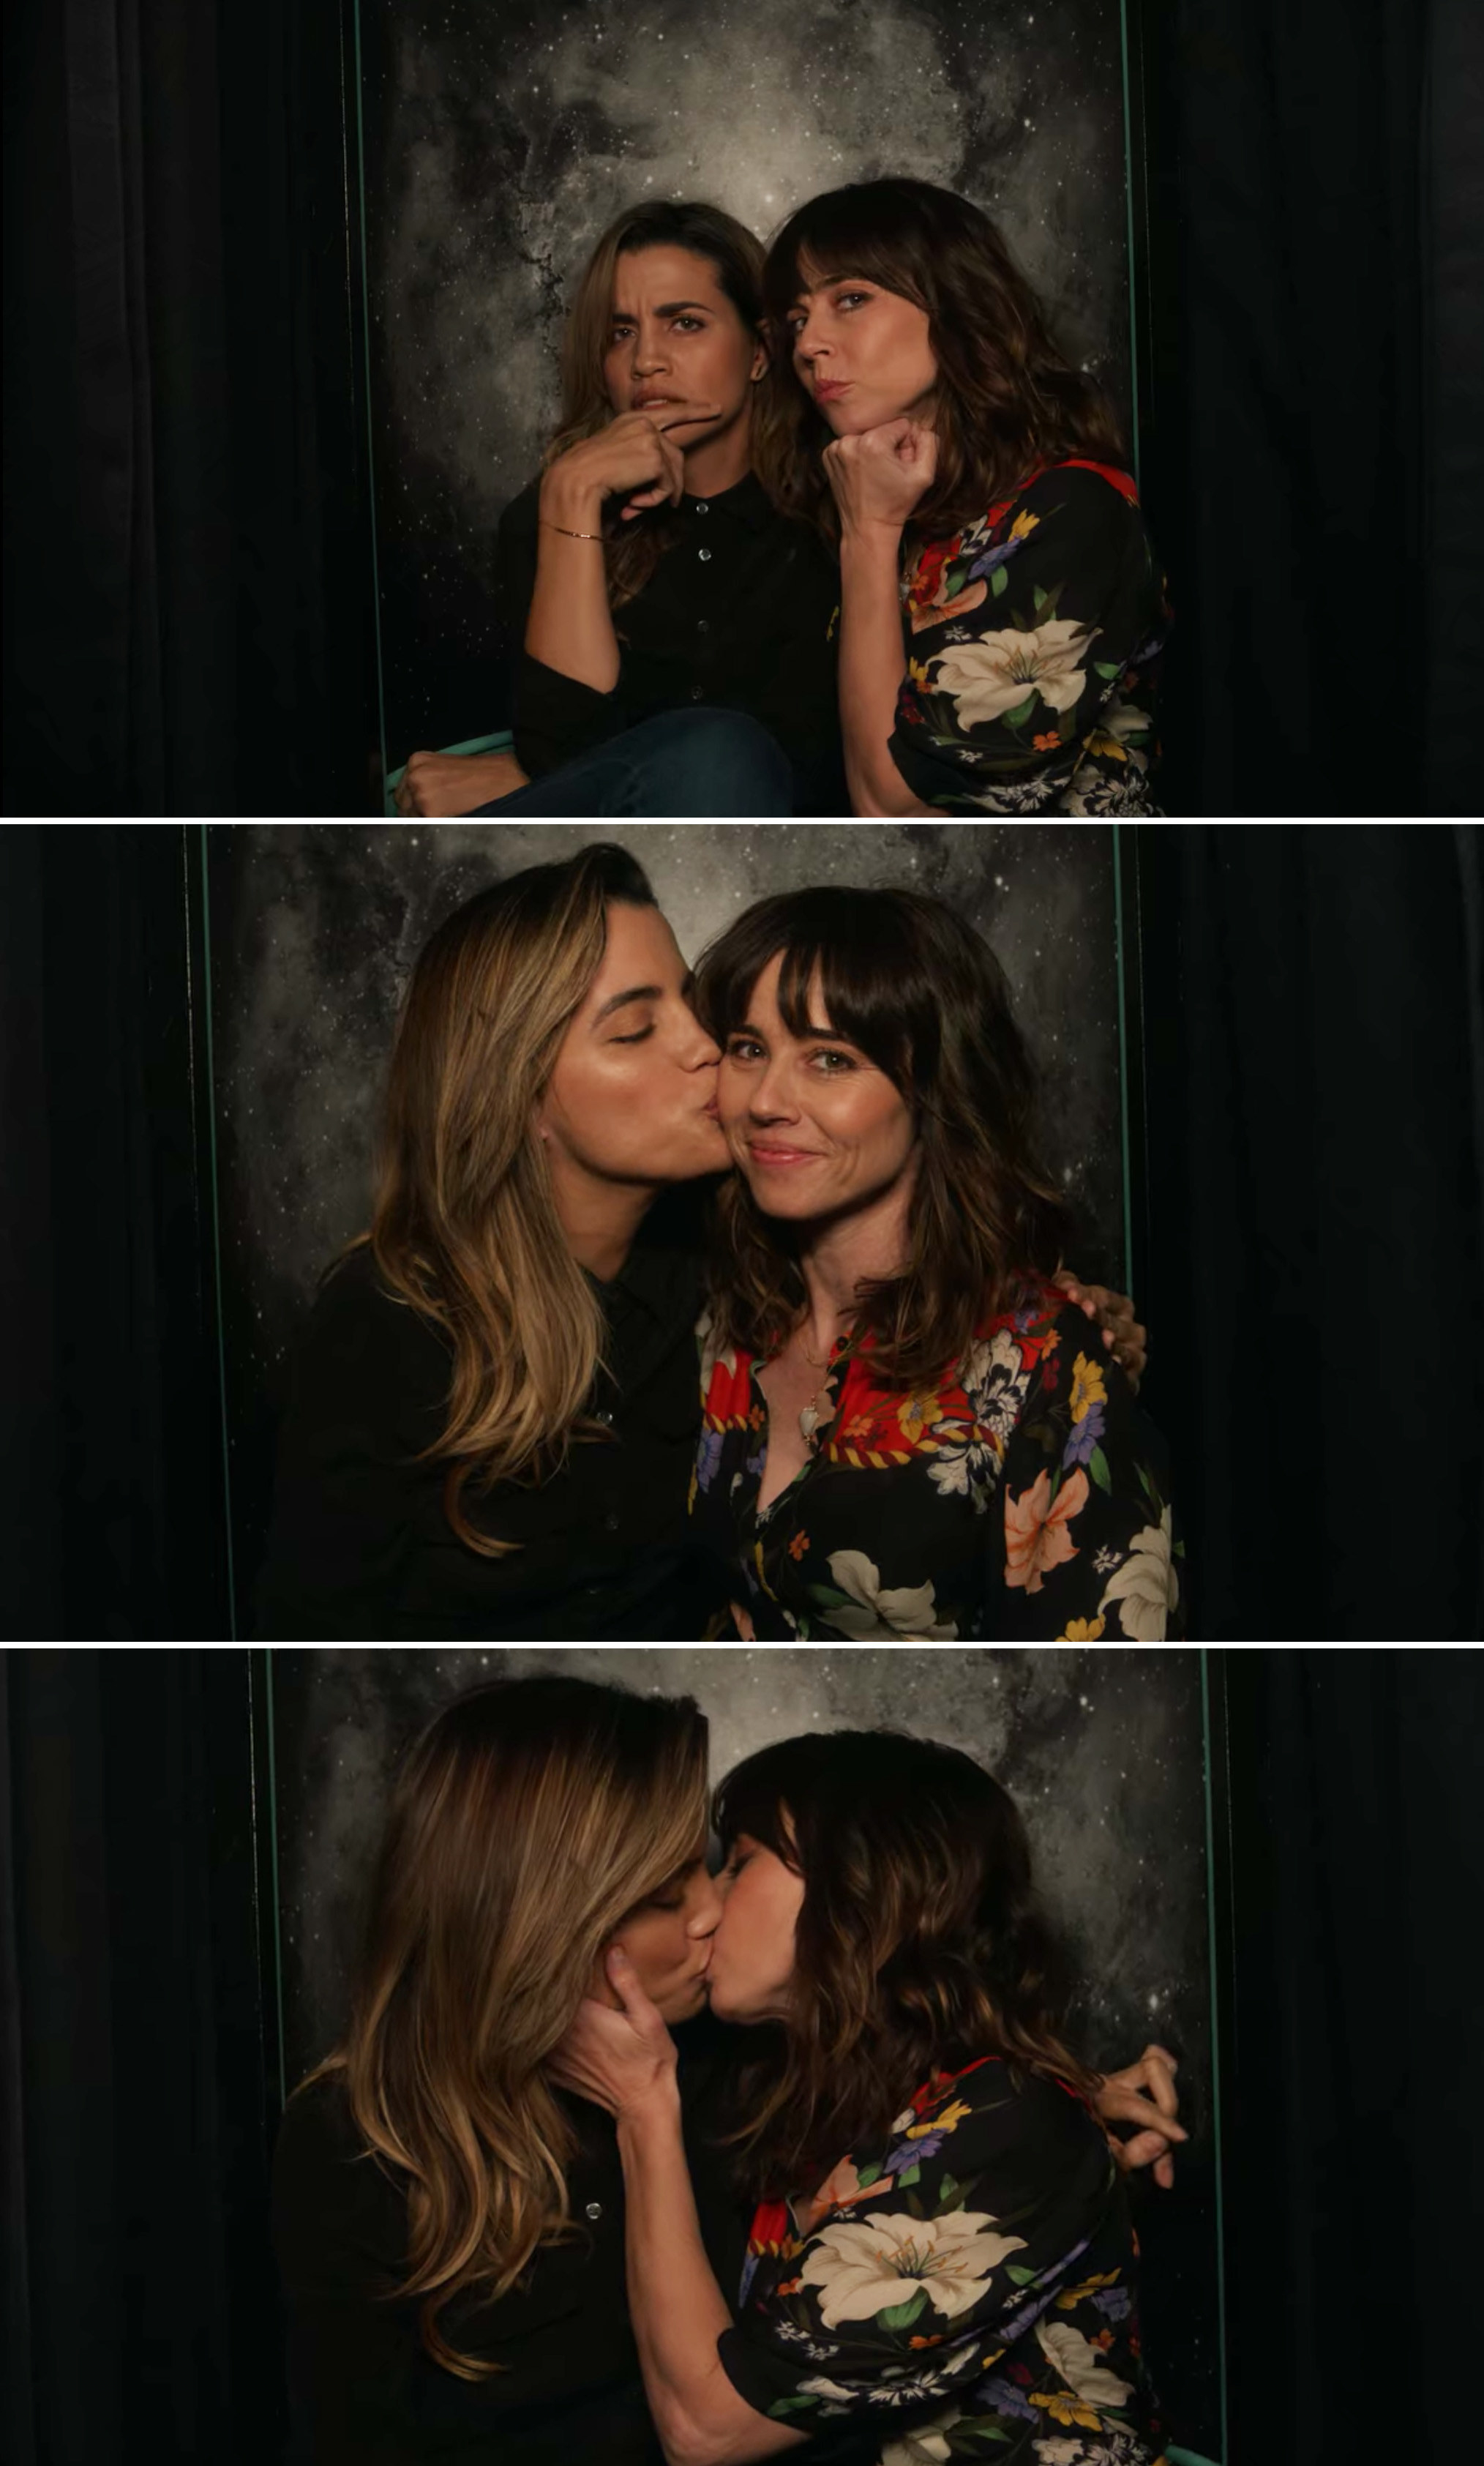 Judy and Michelle posing in a photo booth then kissing